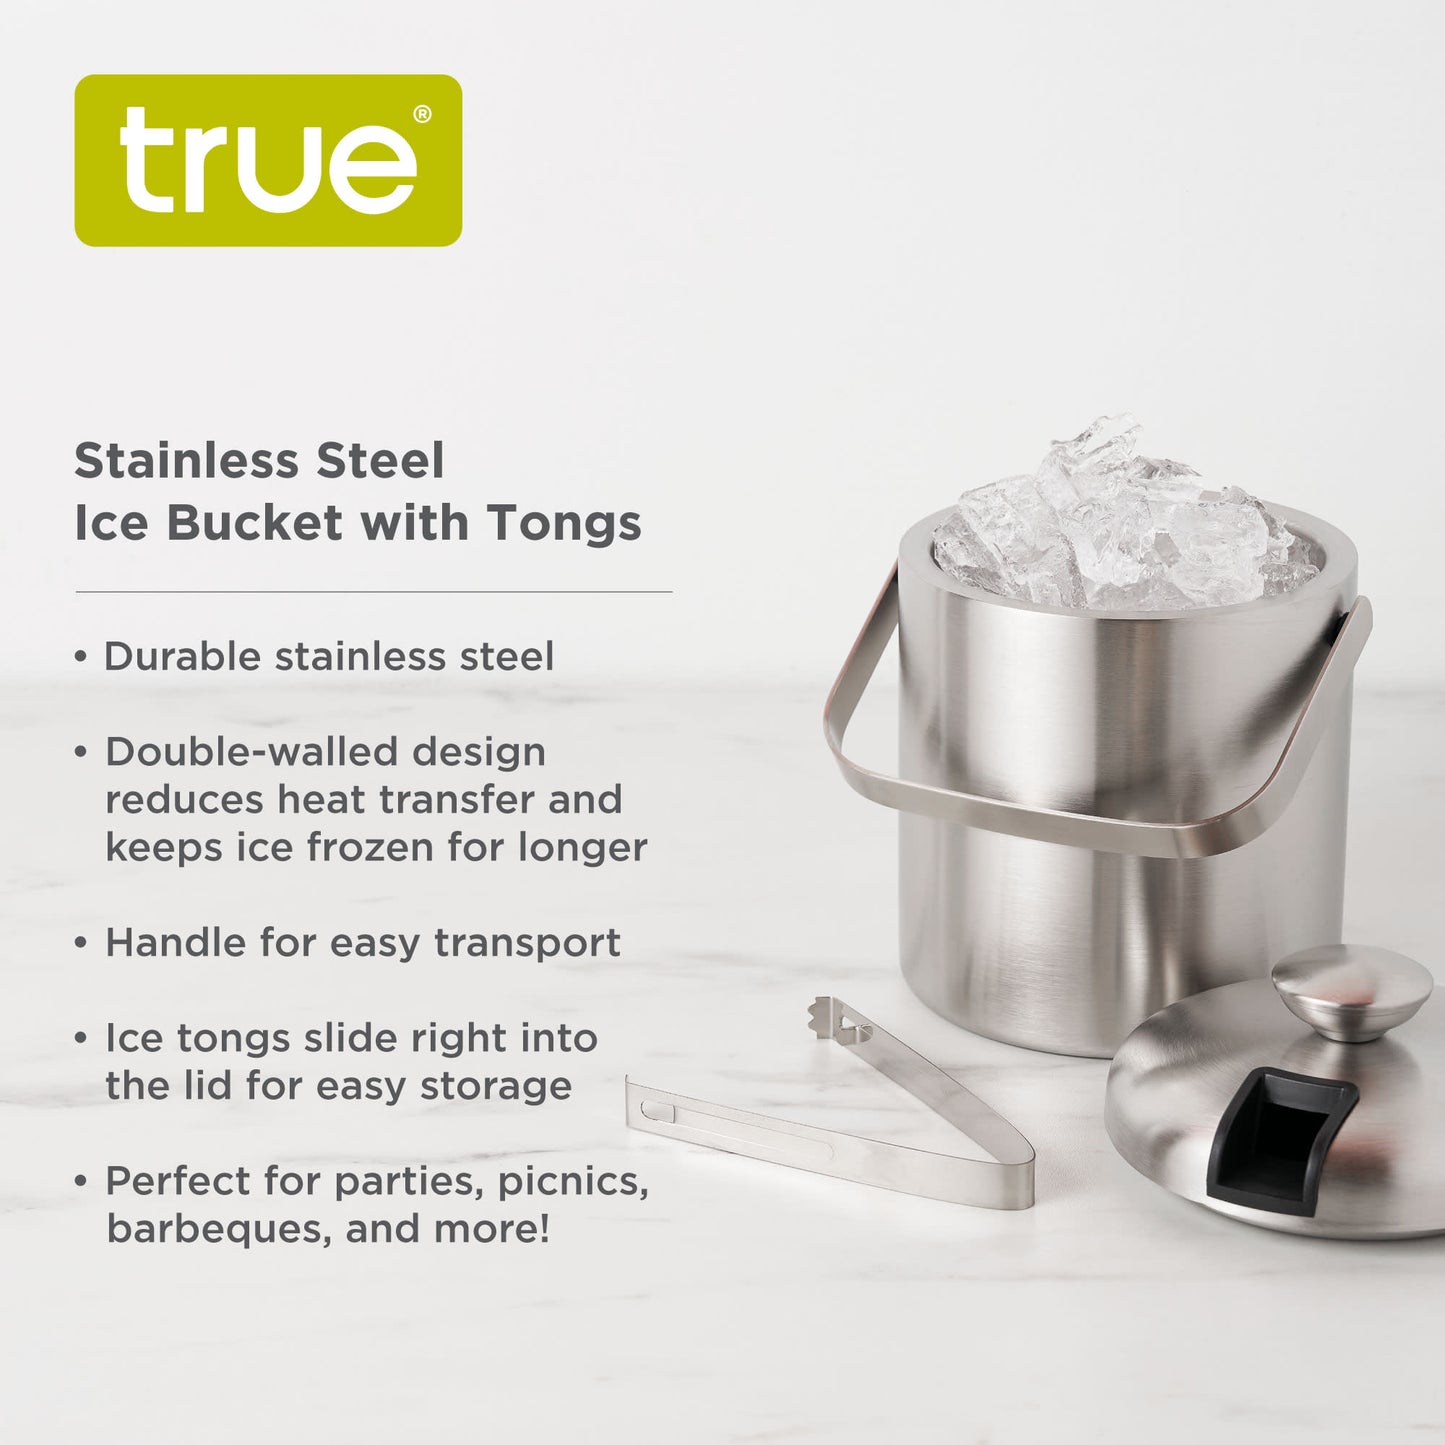 Stainless Steel Ice Bucket with Tongs by True